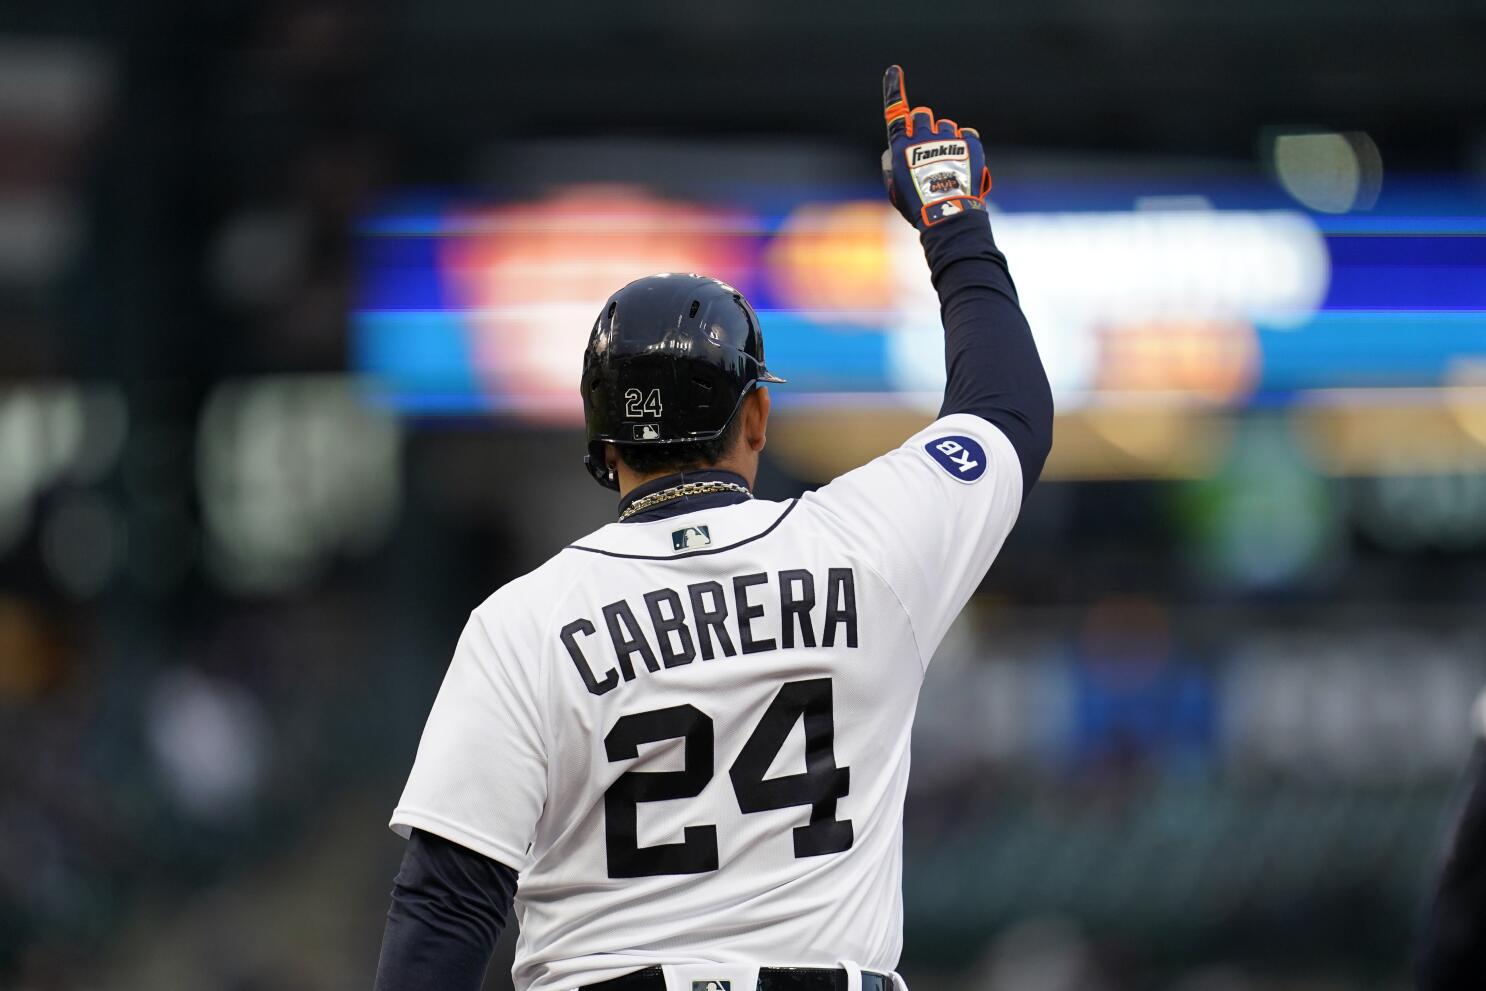 History on hold: Cabrera's chase for 3,000th hit washed out - The